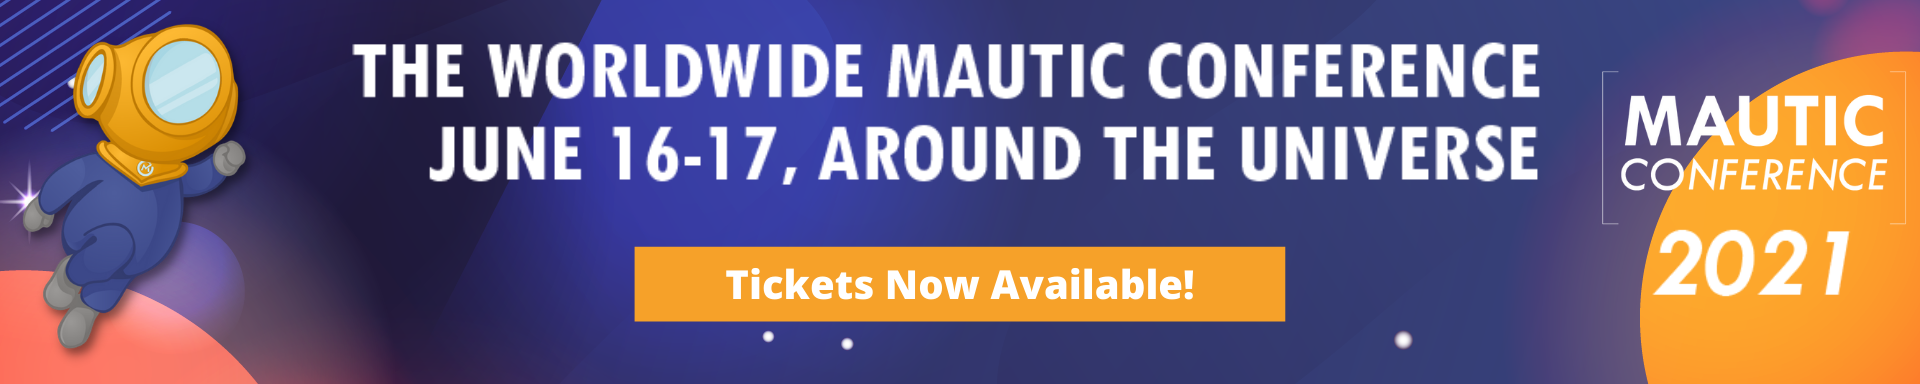 Homepage hero image promoting Mautic Conference Global with tickets available teaser